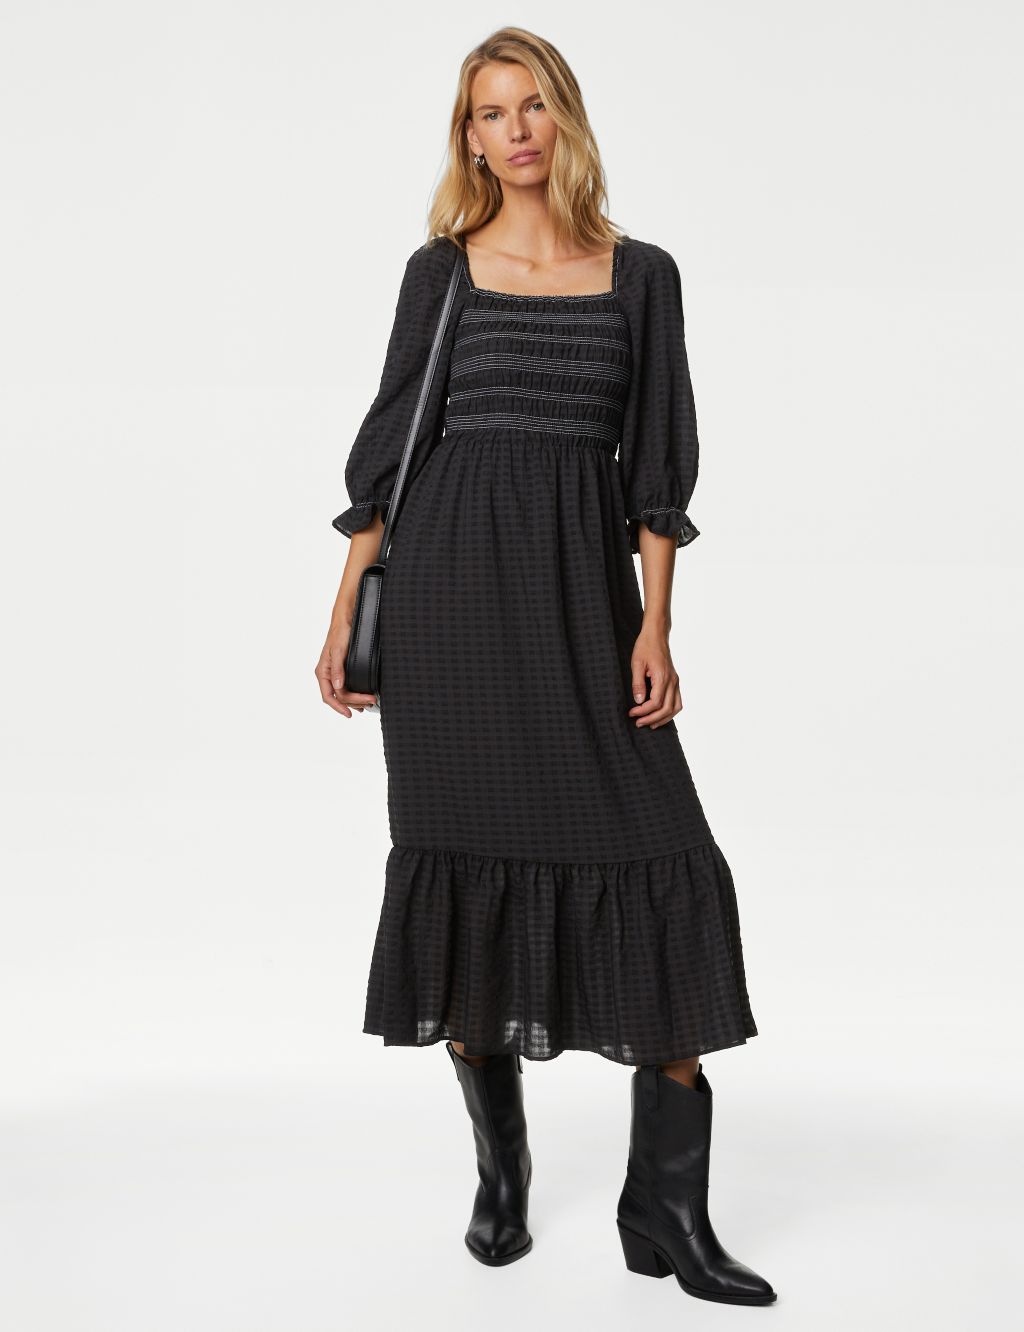 Textured Square Neck Shirred Midaxi Dress image 1